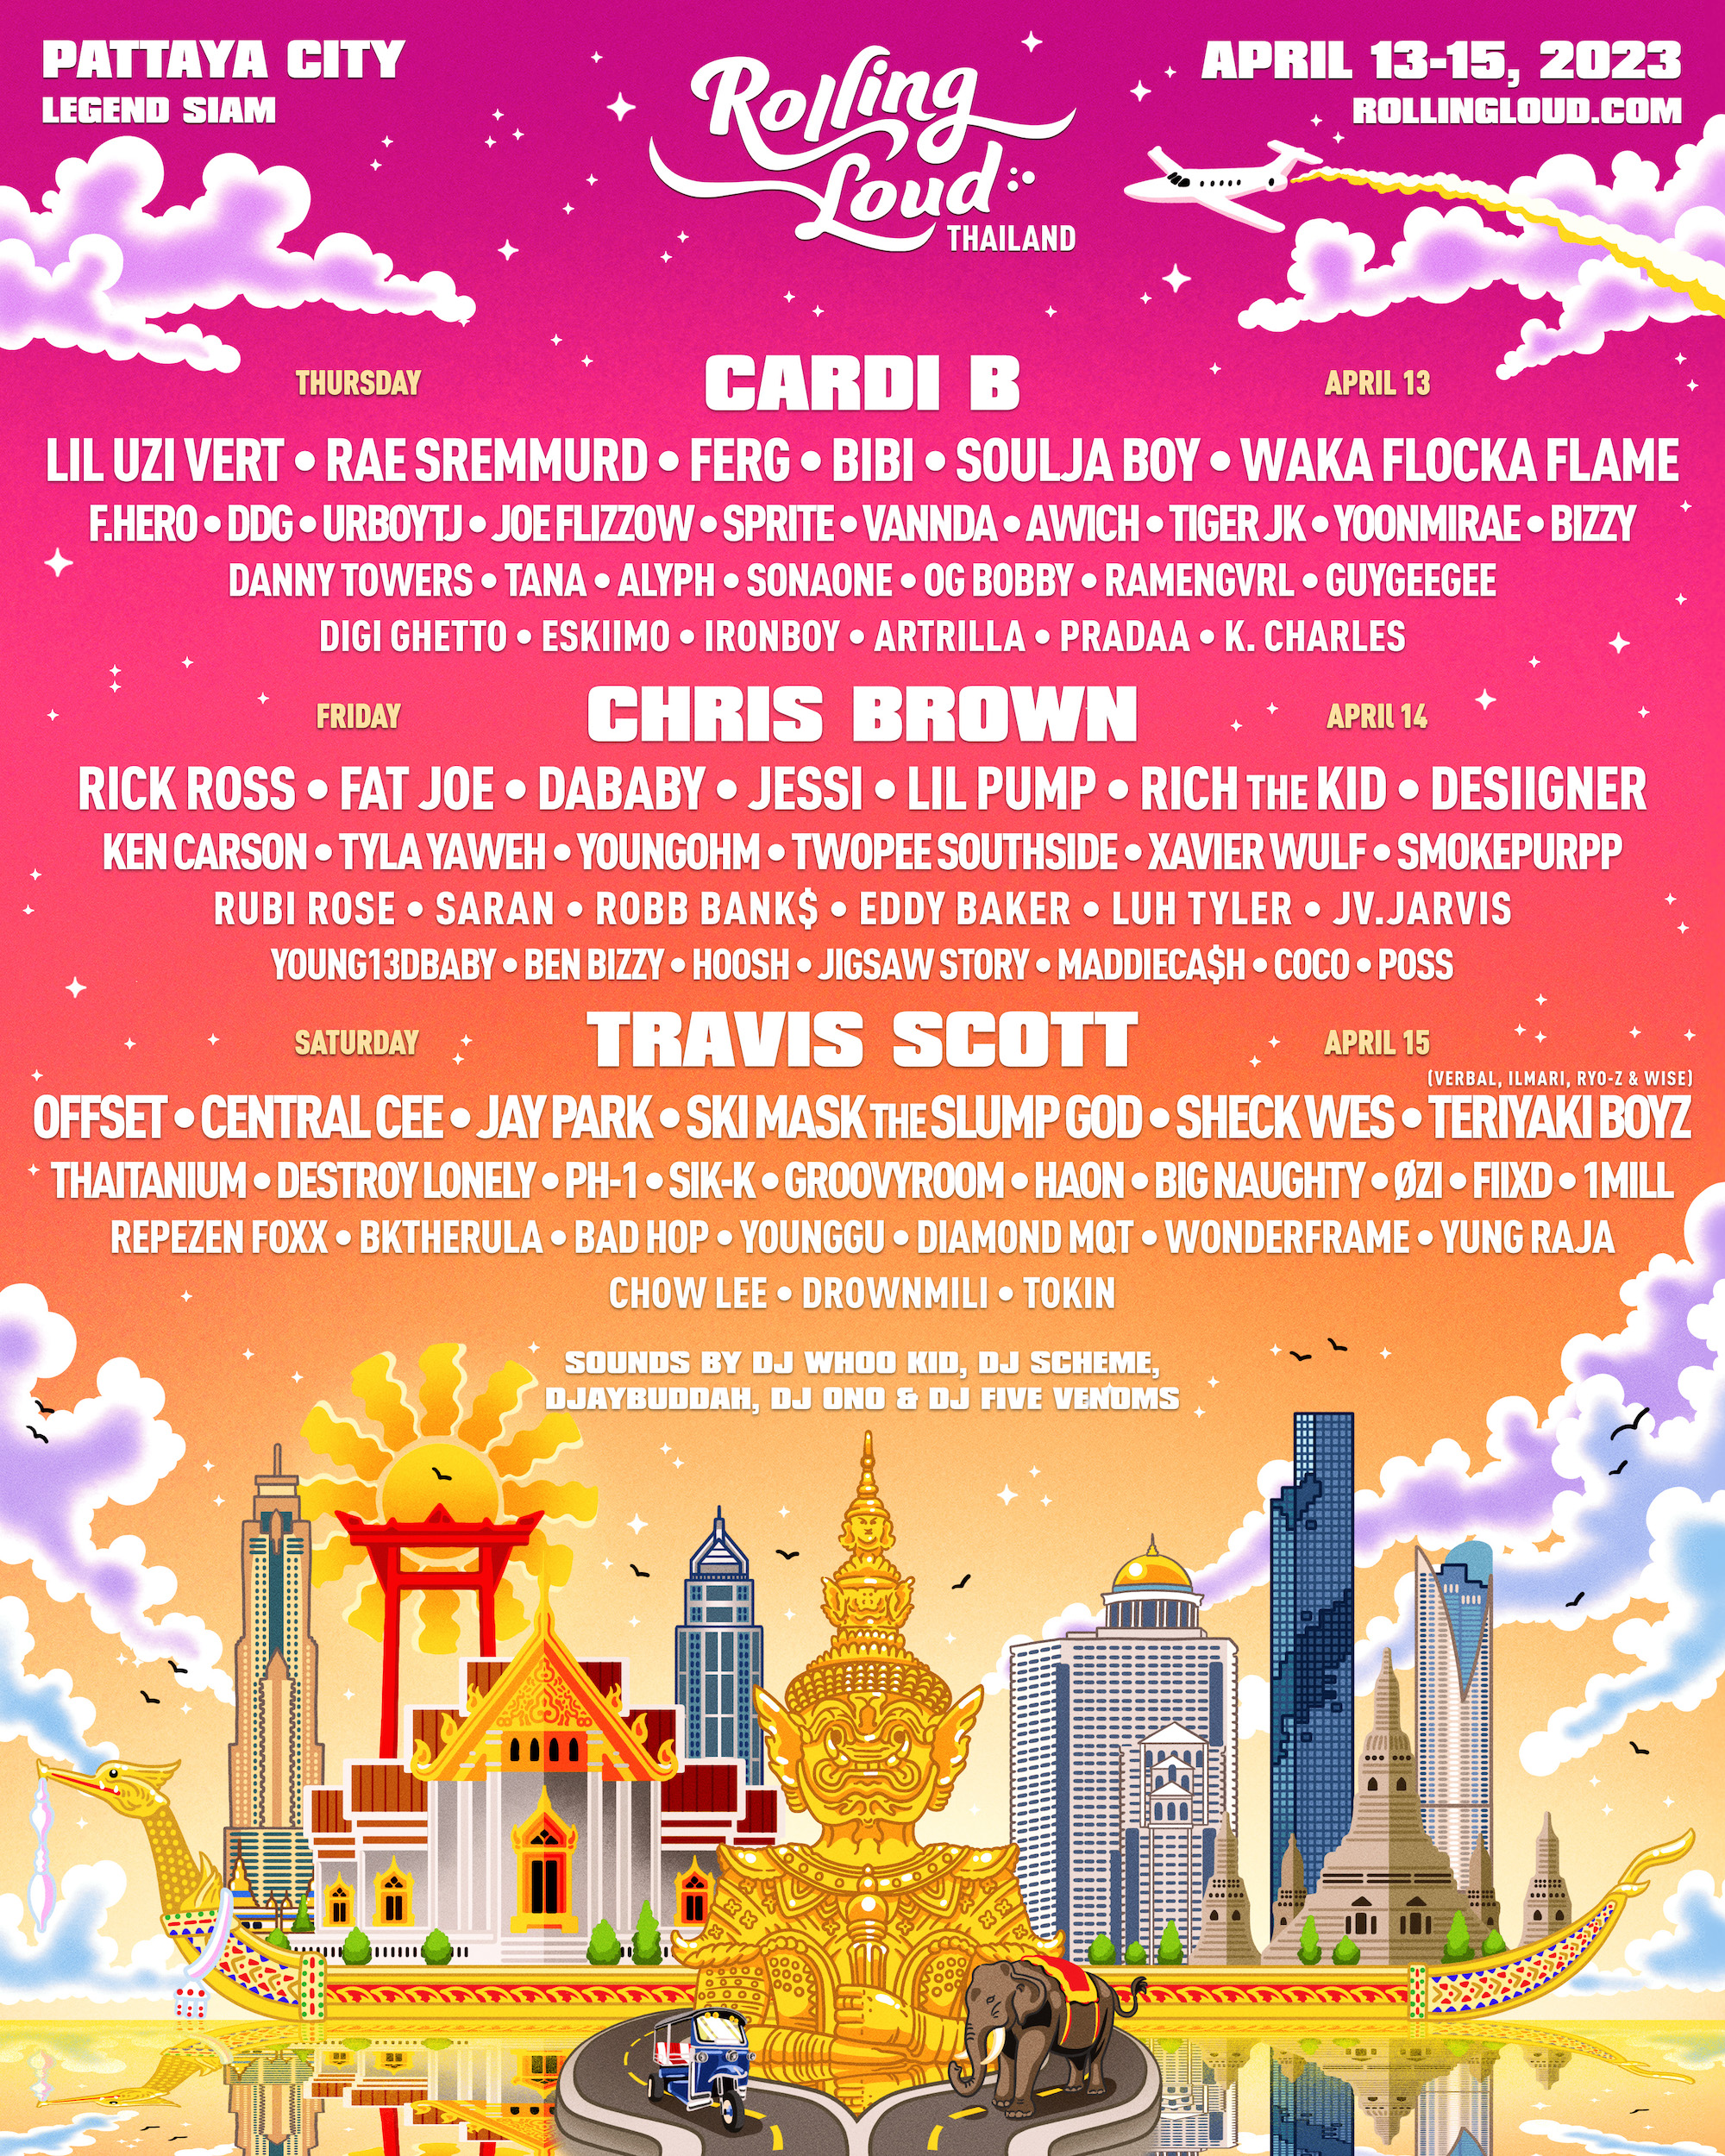 Playboi Carti added to Rolling Loud New York lineup